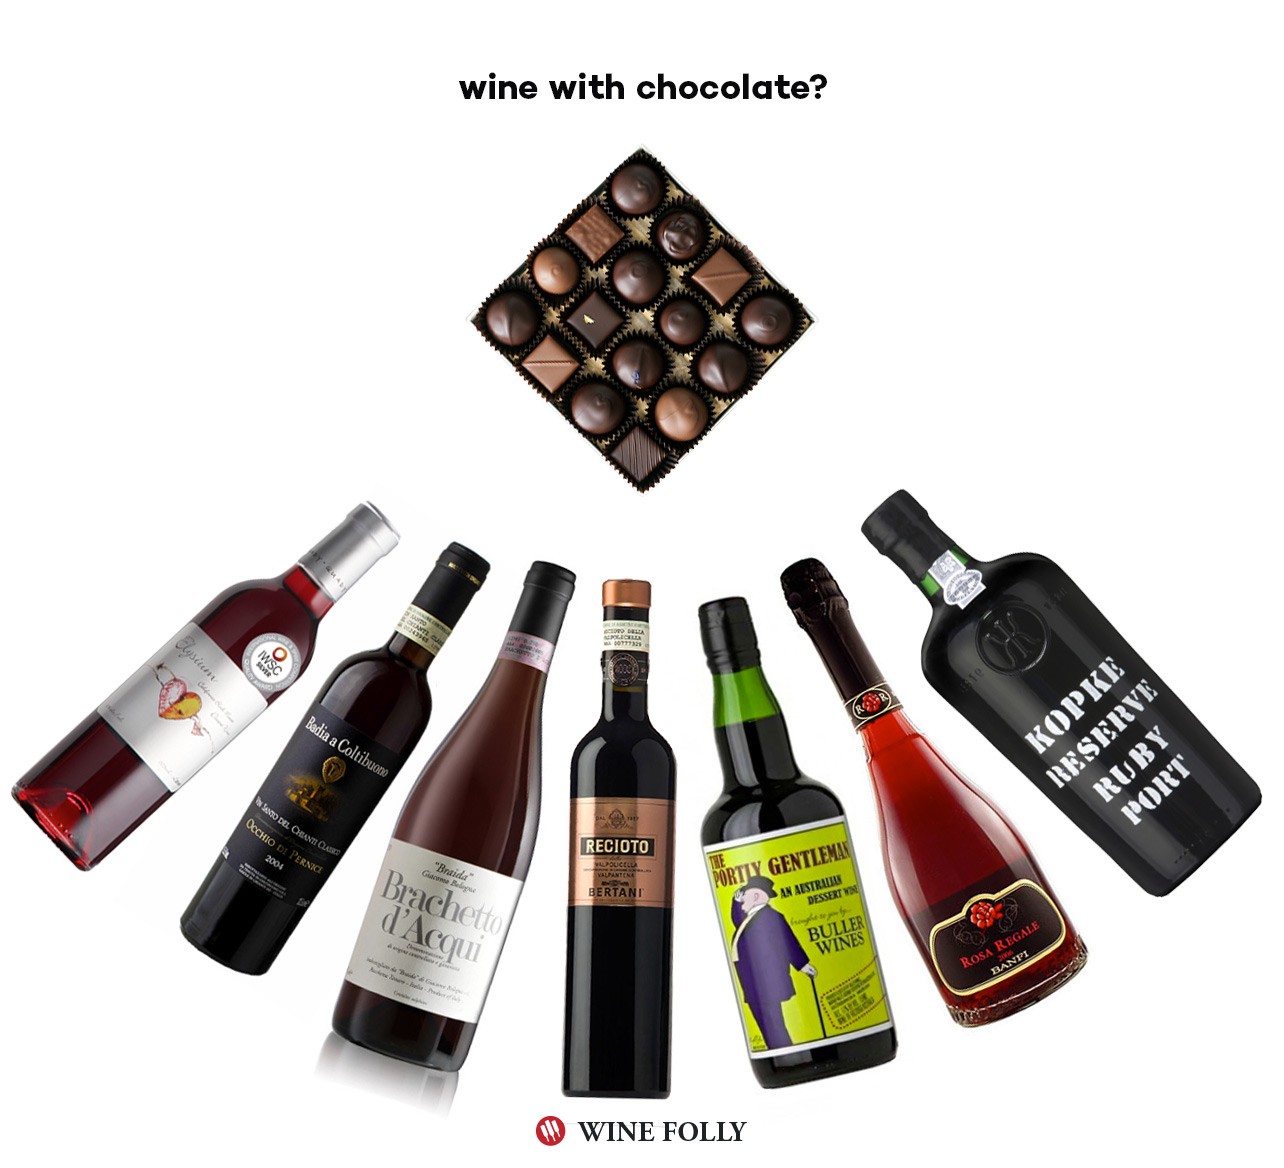 wine-with-chocolate-recommendations-wine-folly